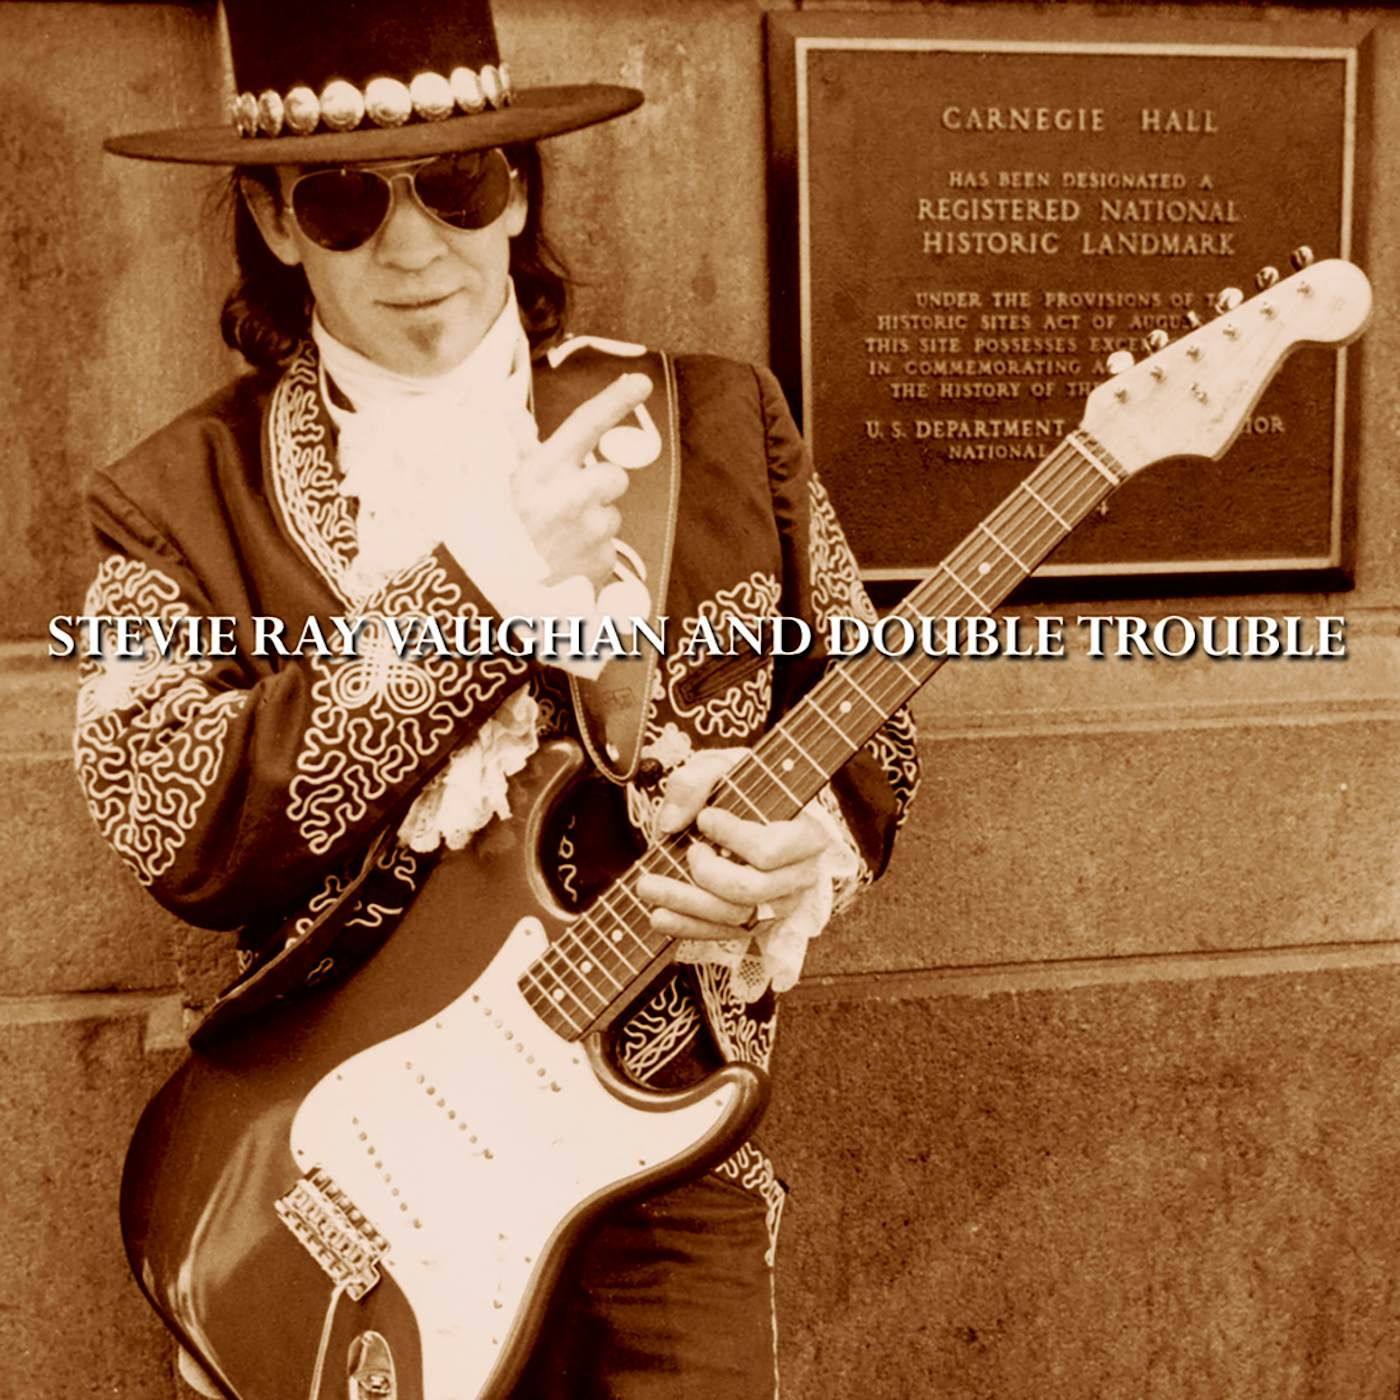 Stevie Ray Vaughan Live At Carnegie Hall CD